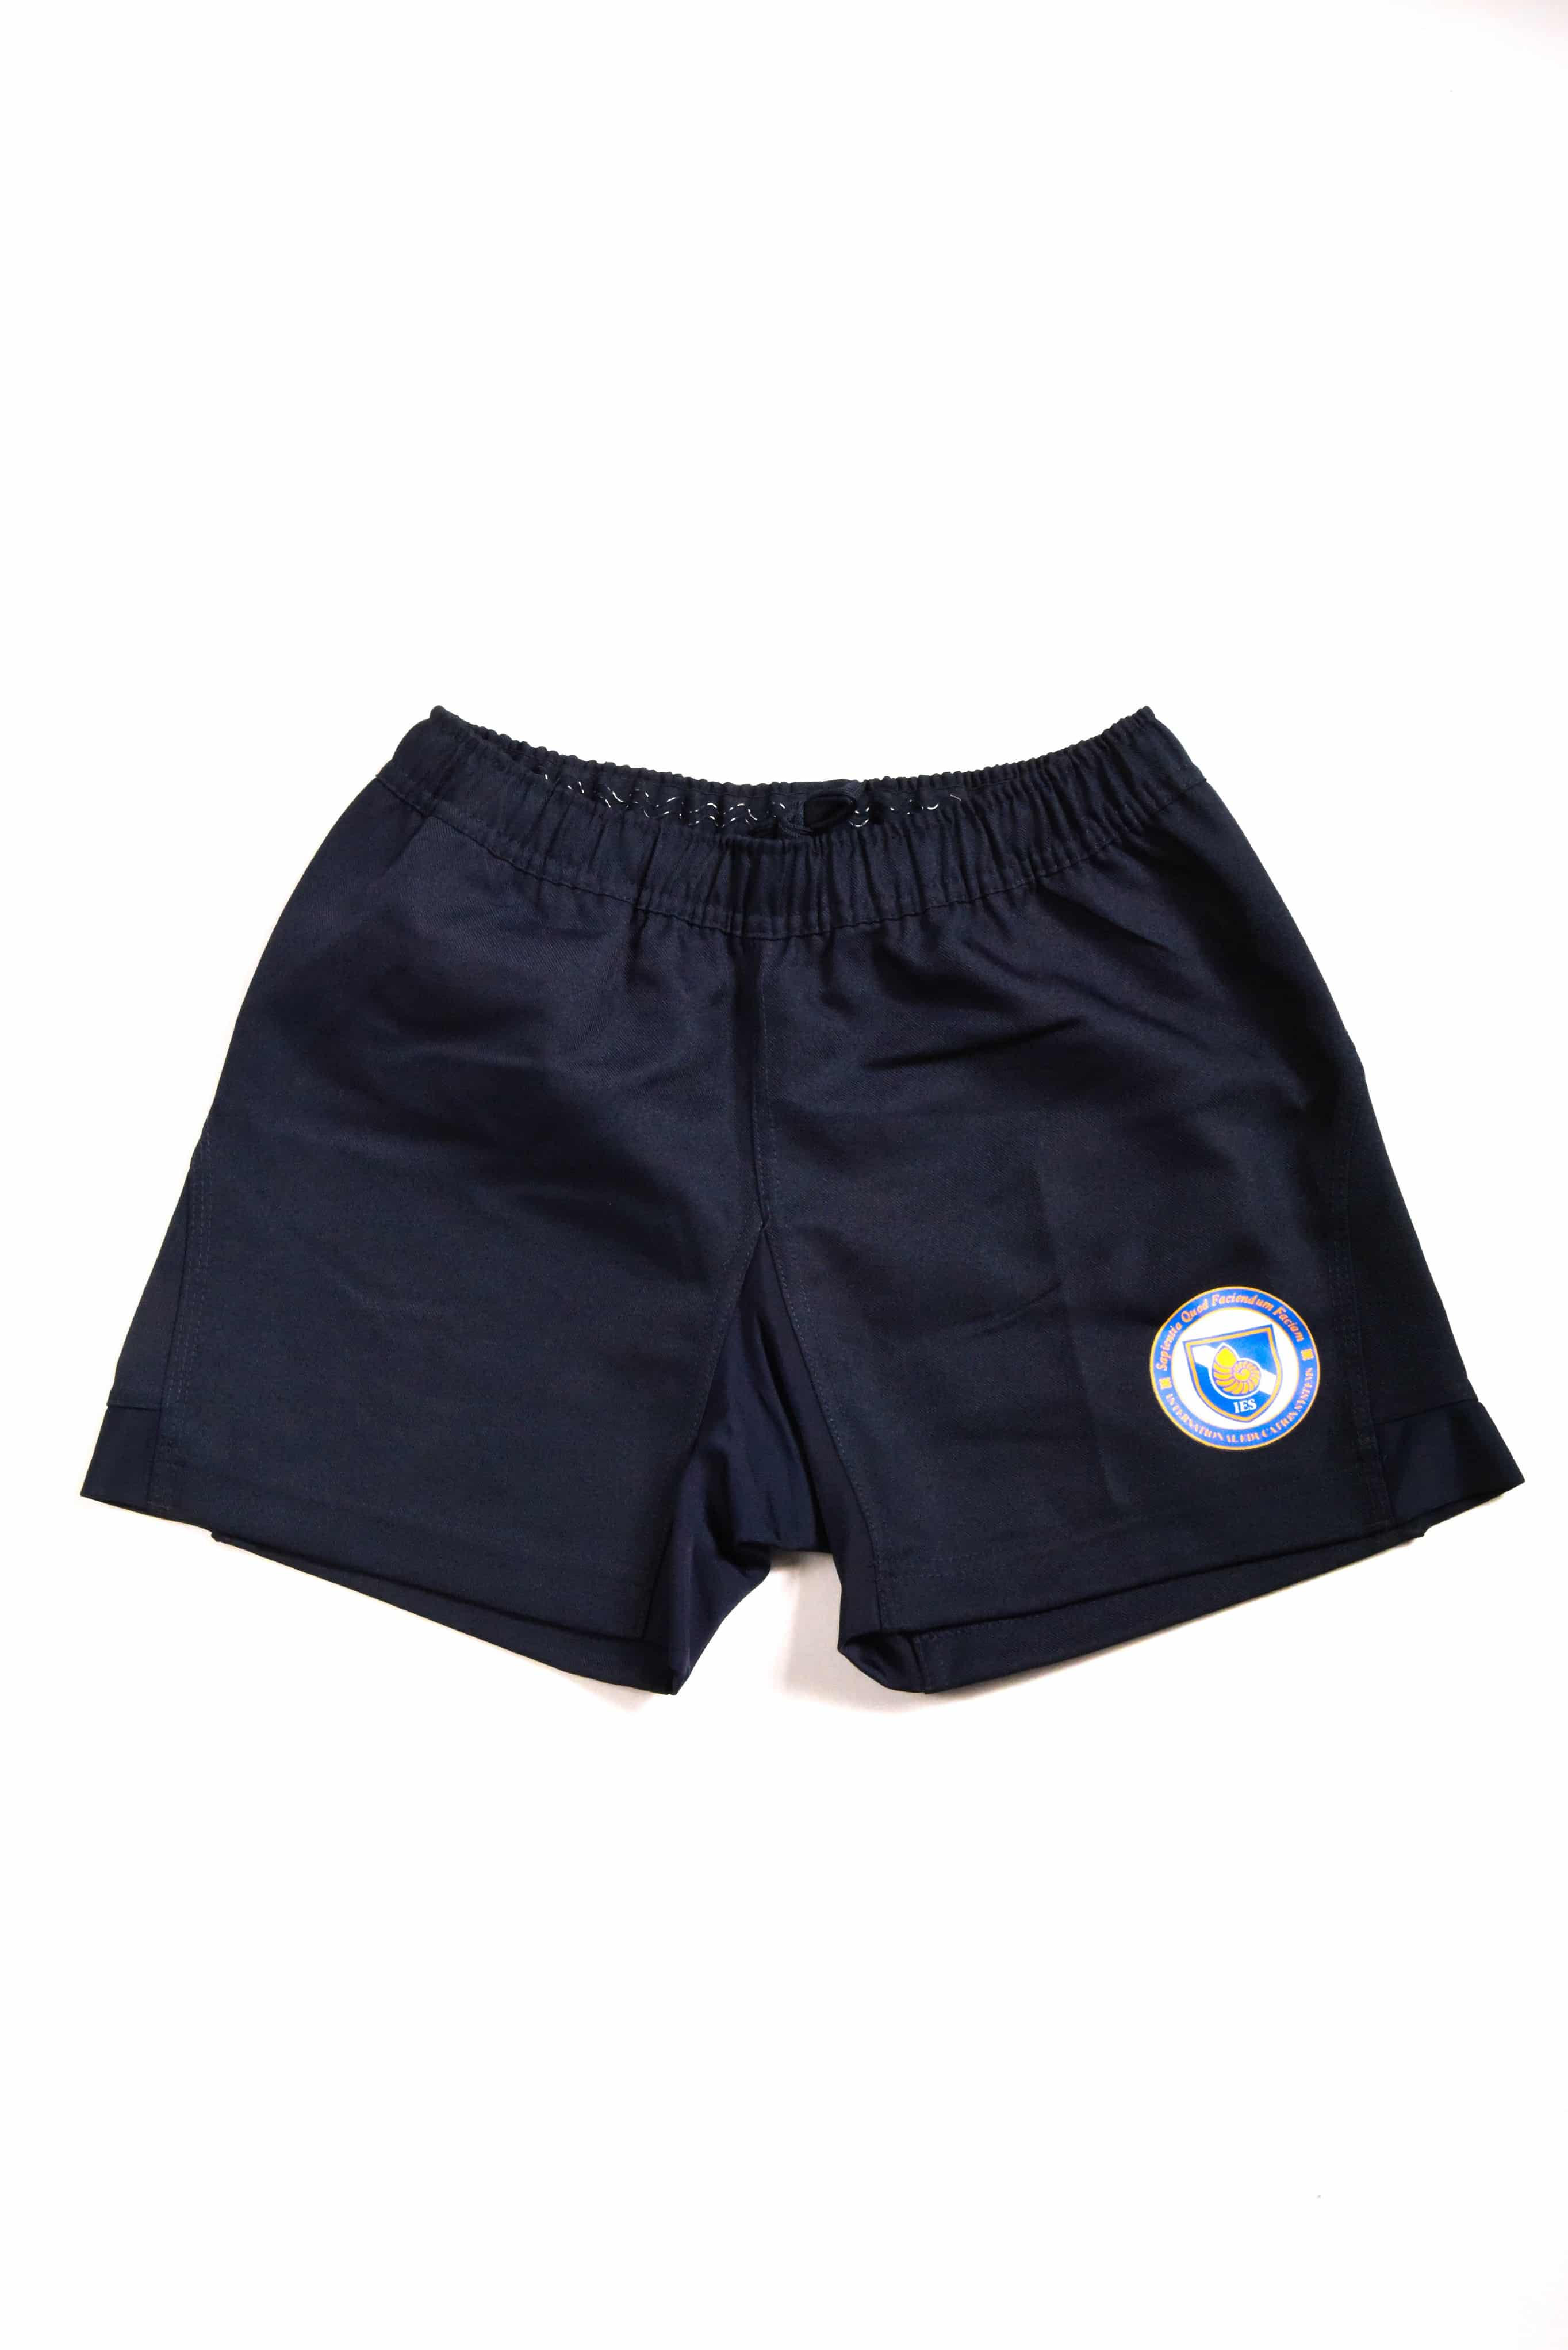 St John's Rugby Shorts - Age 6/7